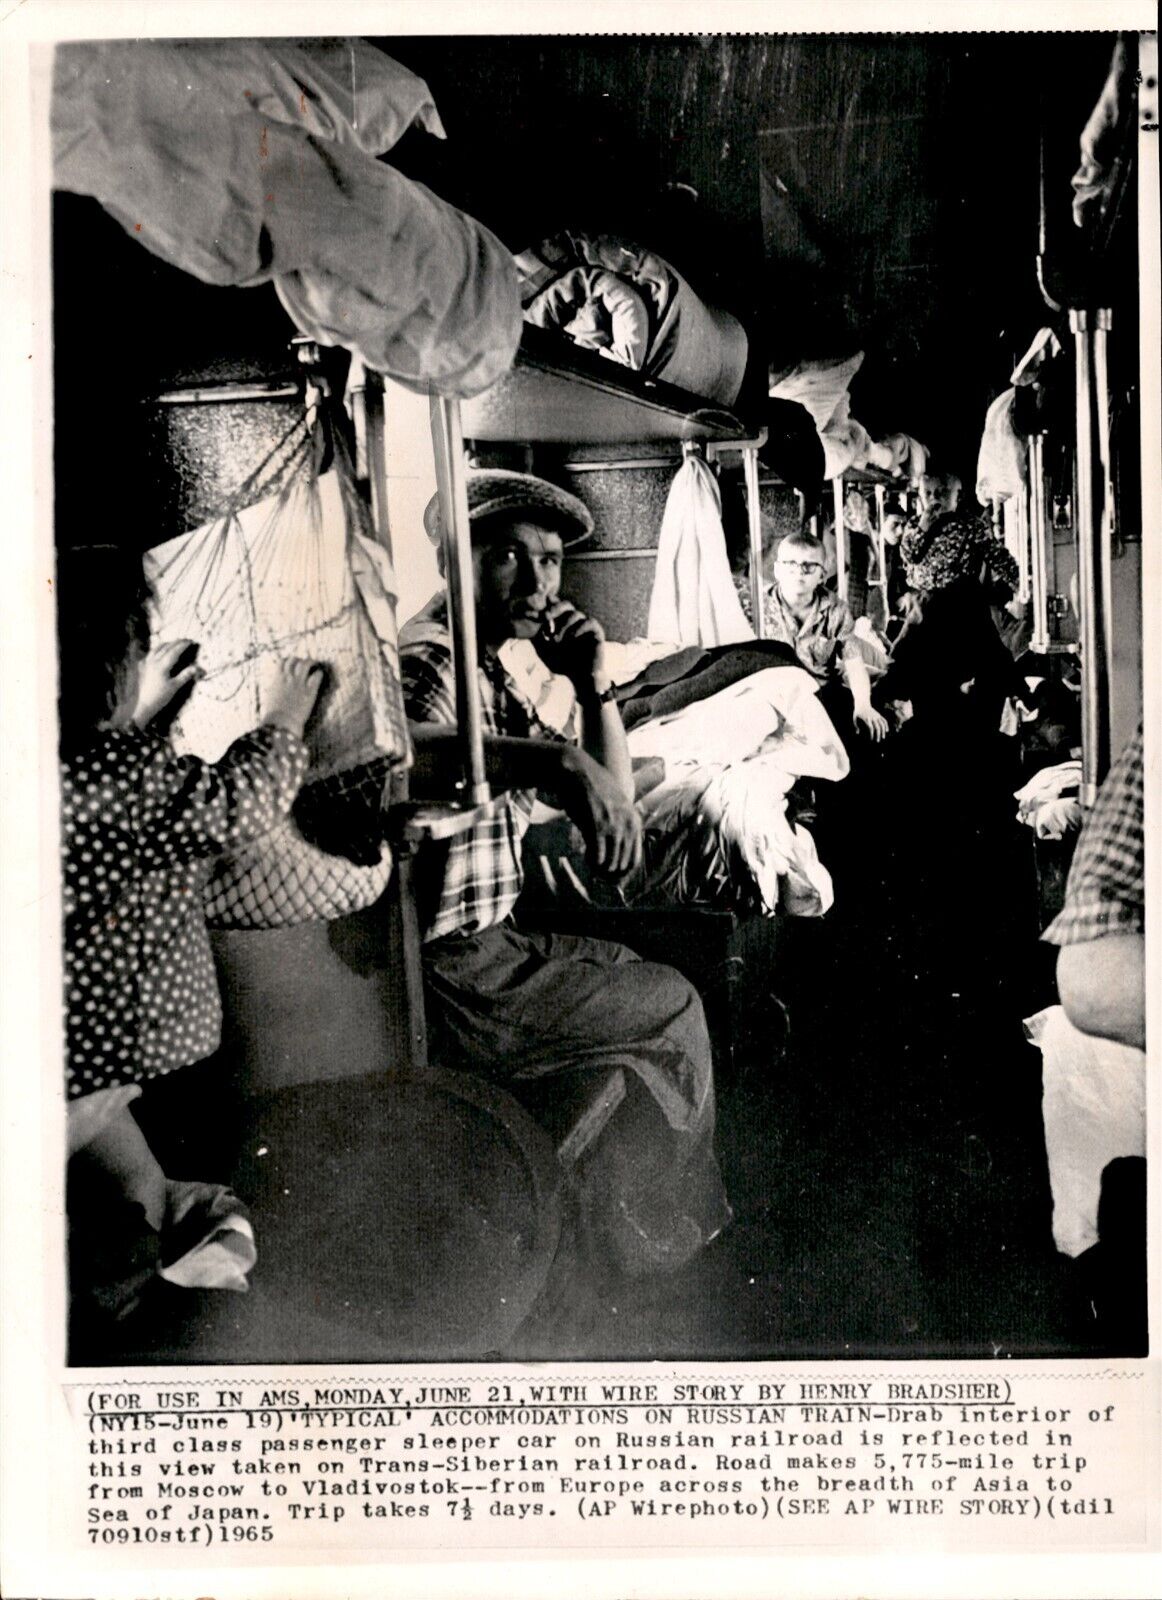 LD247 1965 AP Wire Photo TYPICAL ACCOMODATIONS RUSSIAN TRAIN DRAB TRANS-SIBERIAN